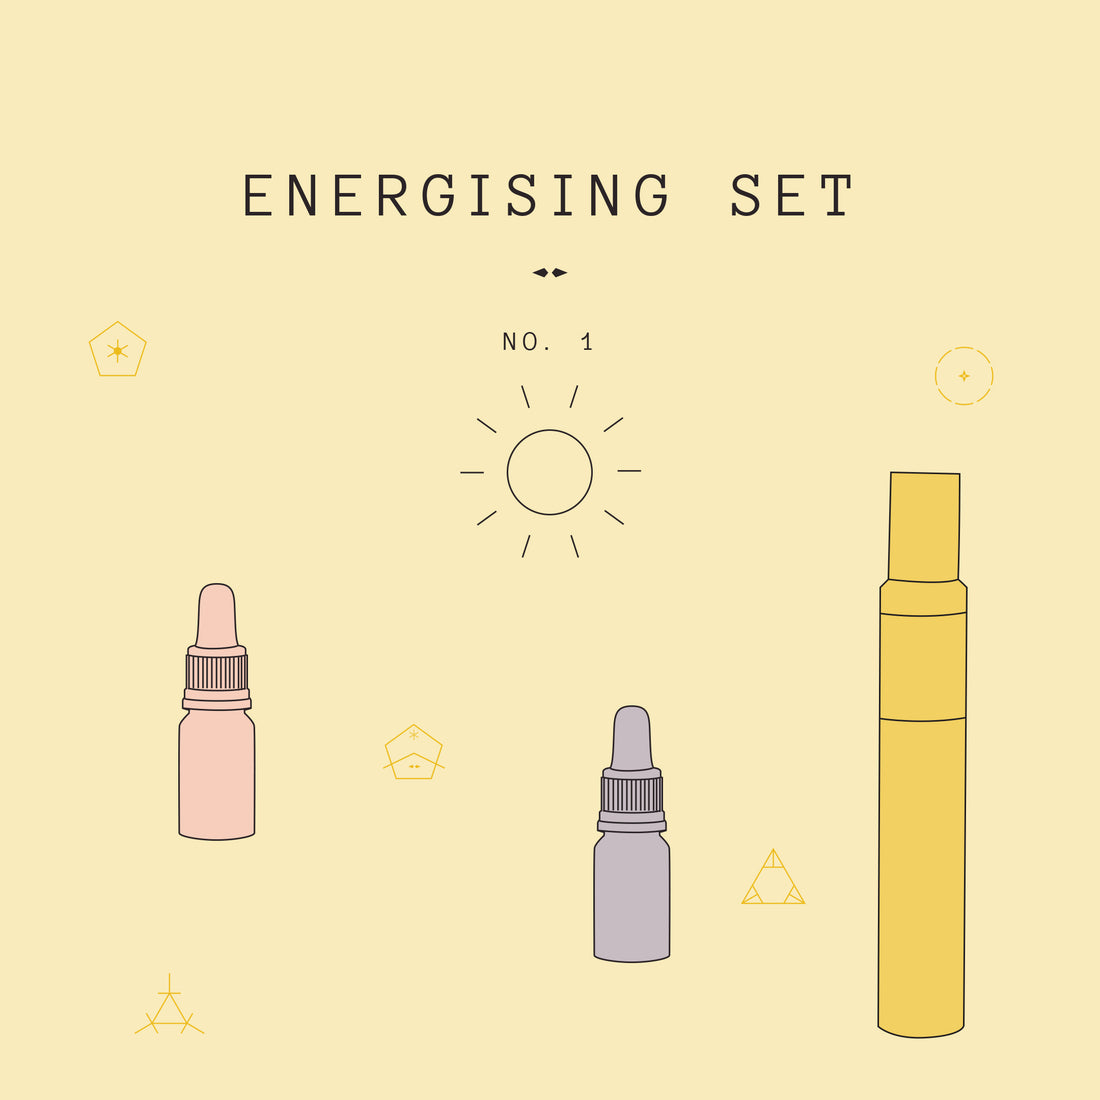 Energising 1 Gift Set is designed to help lift your energy  and your mood. PRODUCTS INCLUDED:  ・Feather & Seed Effervescent Essential Oil, 10ml ・Feather & Seed Zesty Essential Oil, 10ml ・Serene Body Health Lift Natural Perfume Roll On, 10ml